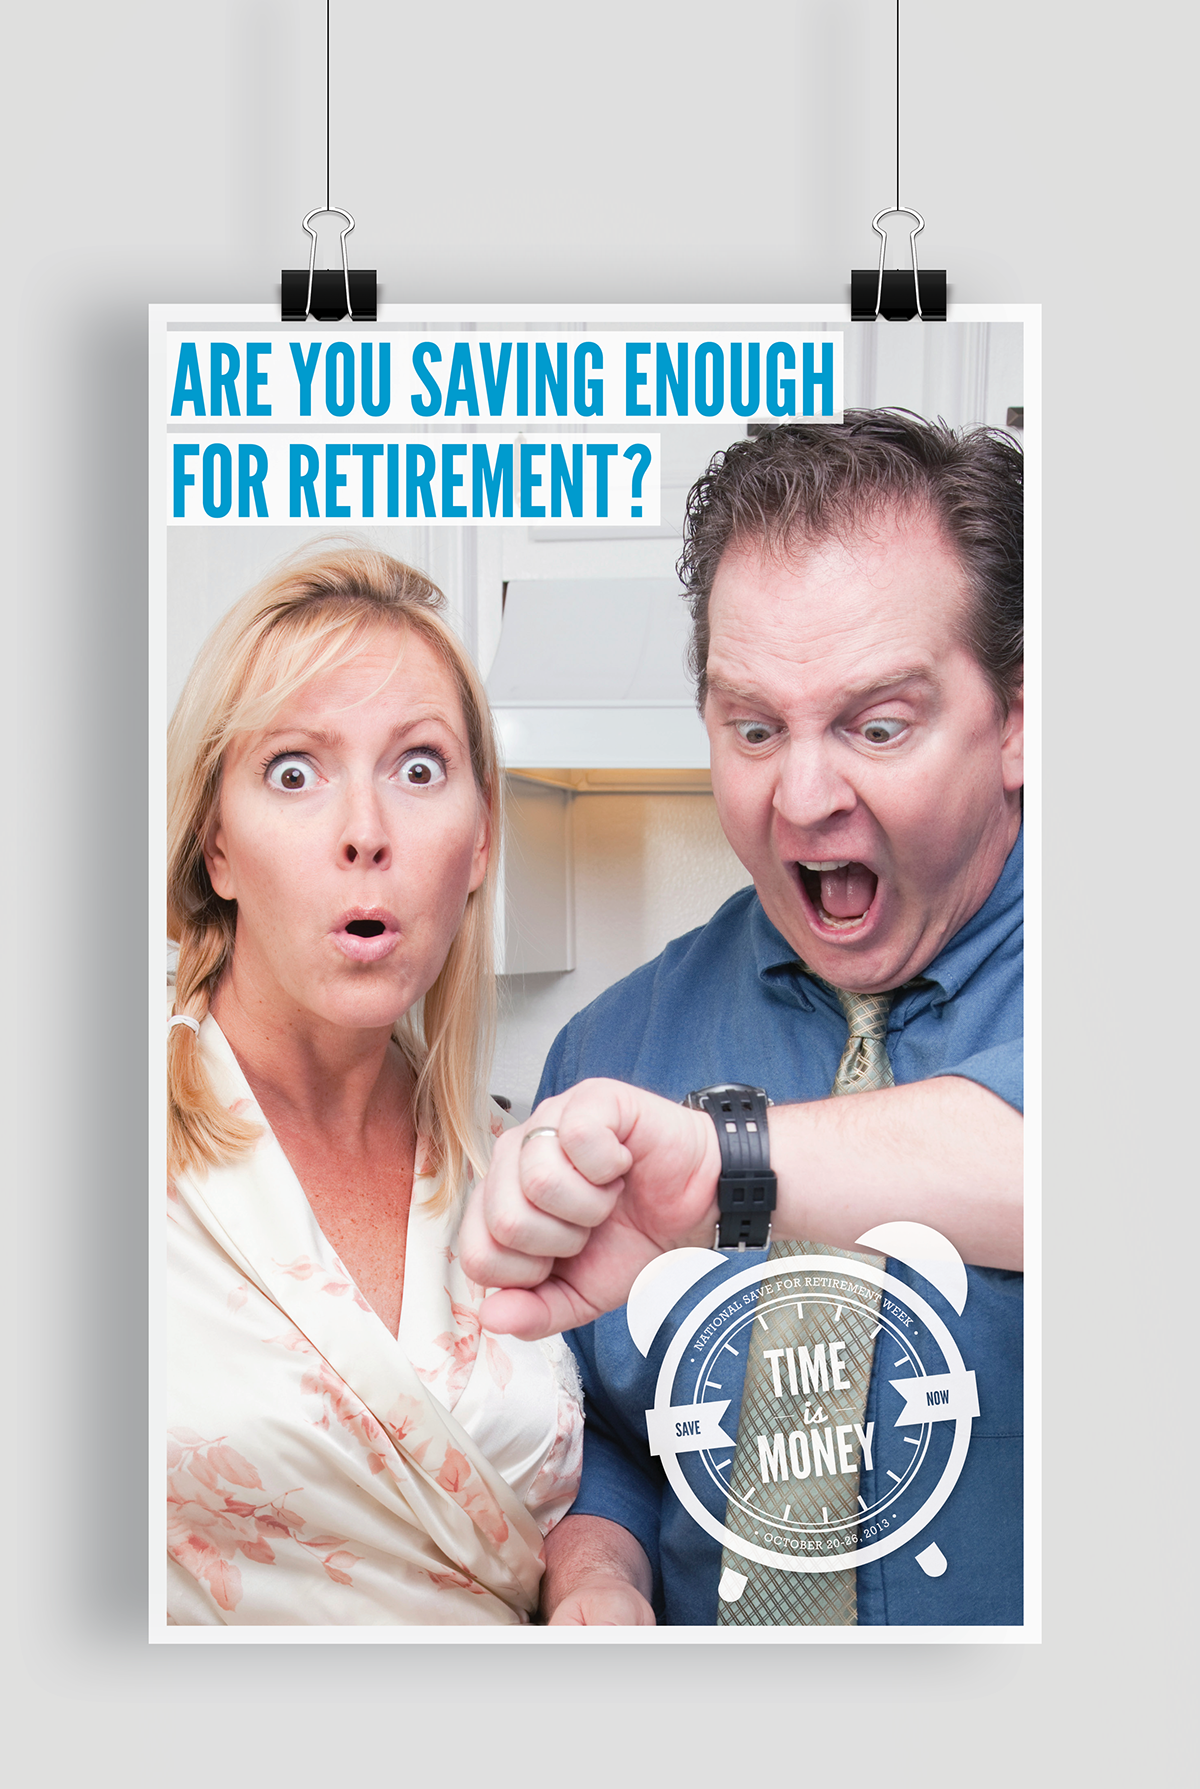 investing retirement Save For Retirement campaign posters postcards email template logos Logo system